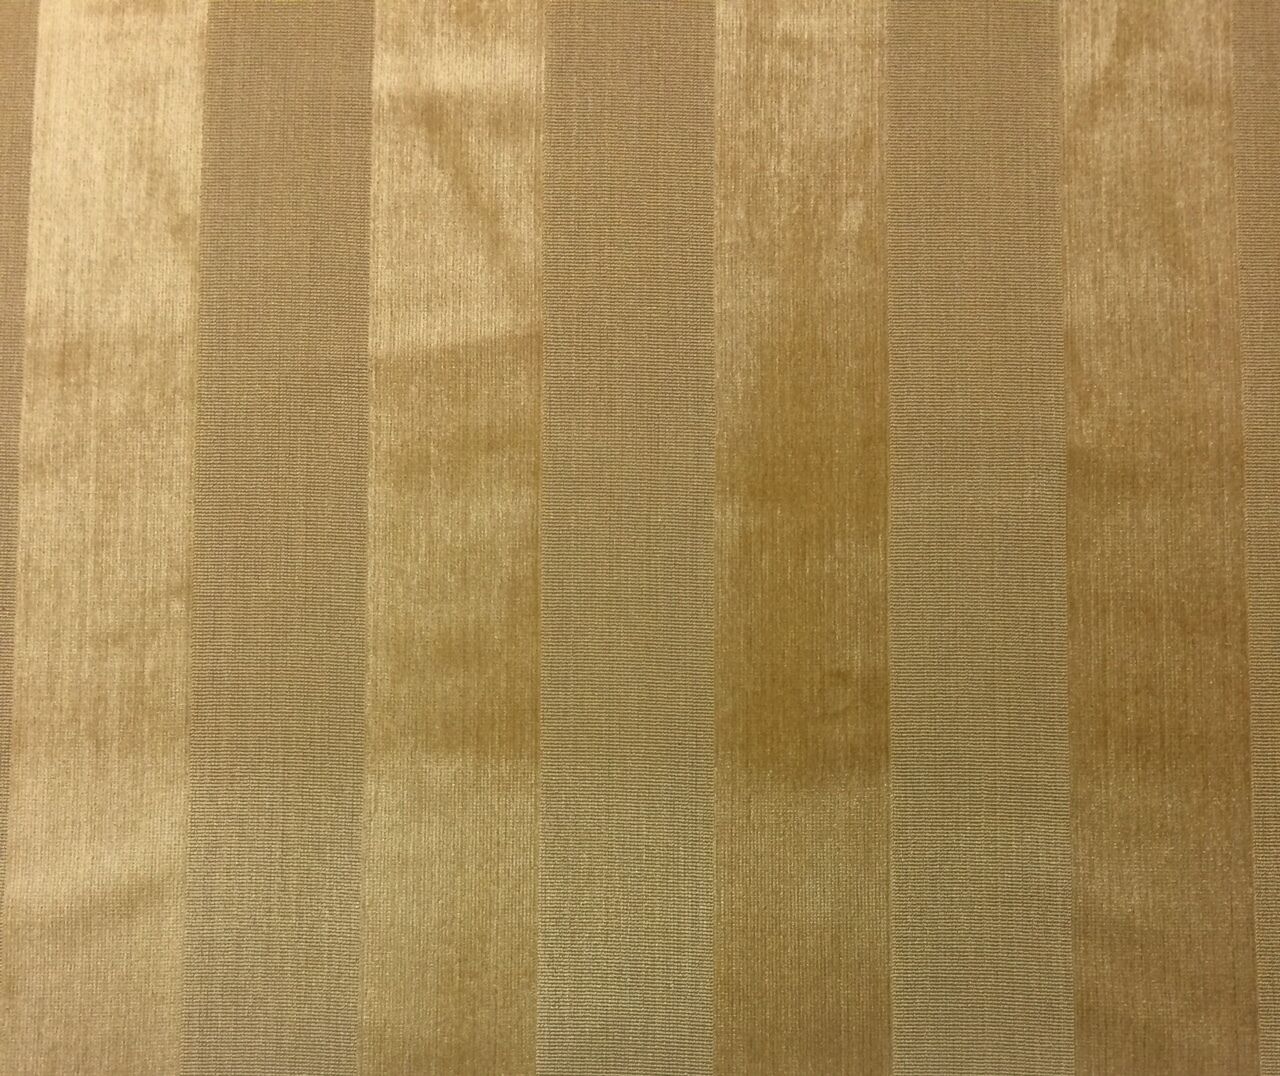 Primary image for F SCHUMACHER CUNARD STRIE VELVET STRIPE LIGHT GOLD YELLOW FABRIC BY YARD 52"W